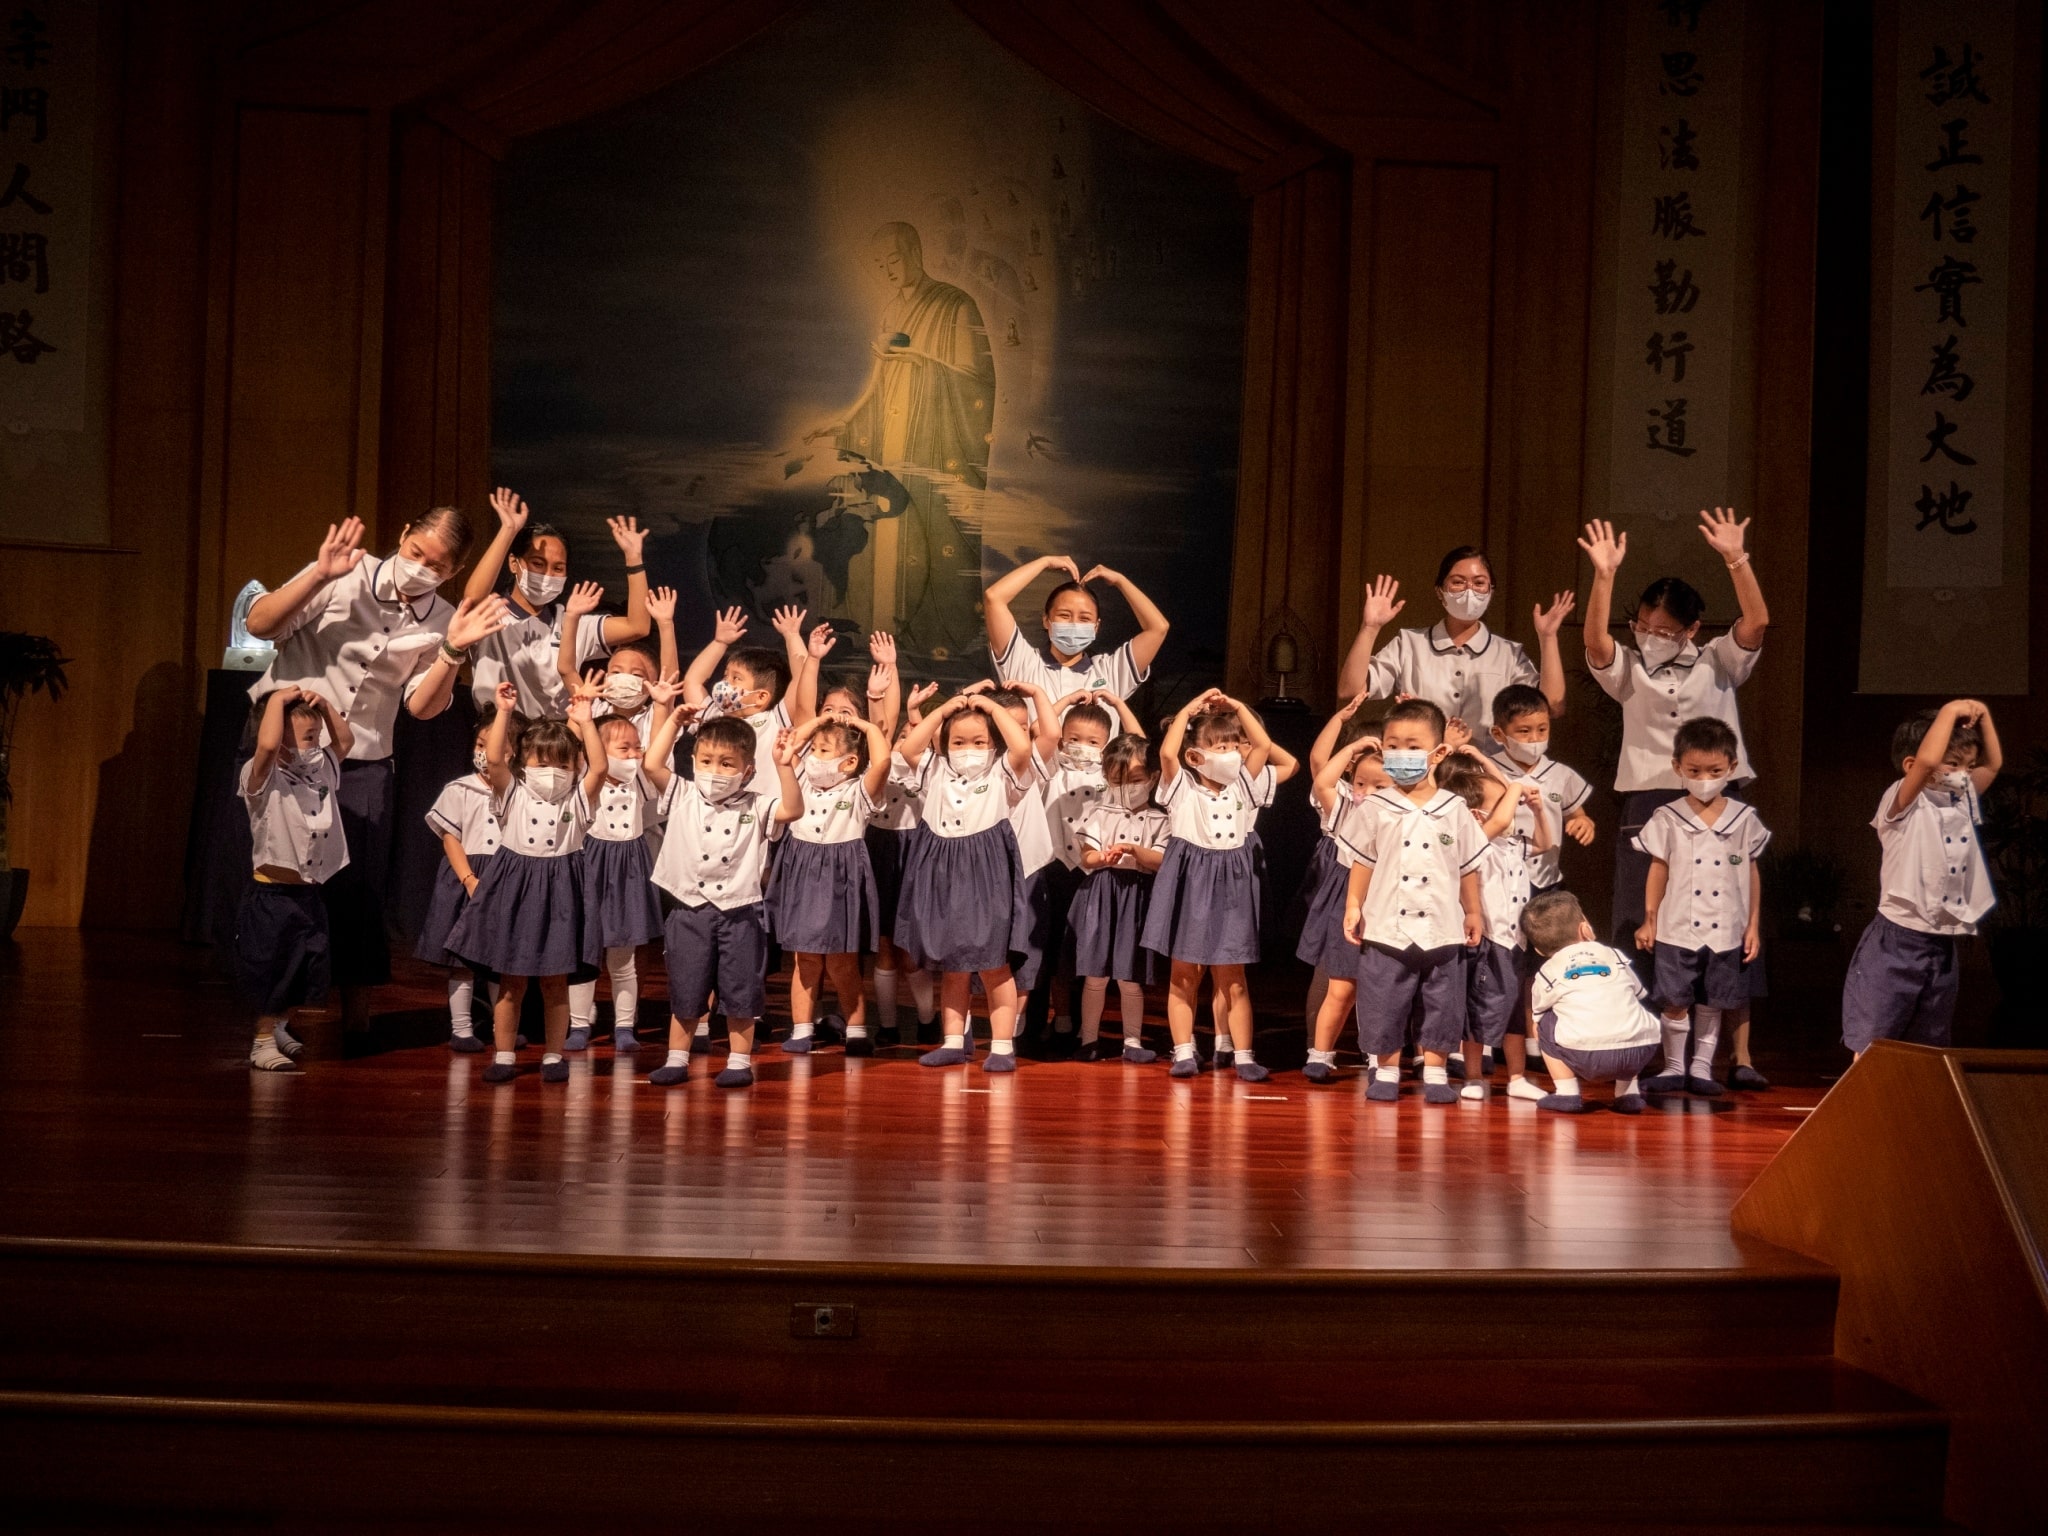 Preschool students performed the song “Mama, I love you” to express gratitude to their mother. 【Photo by Matt Serrano】